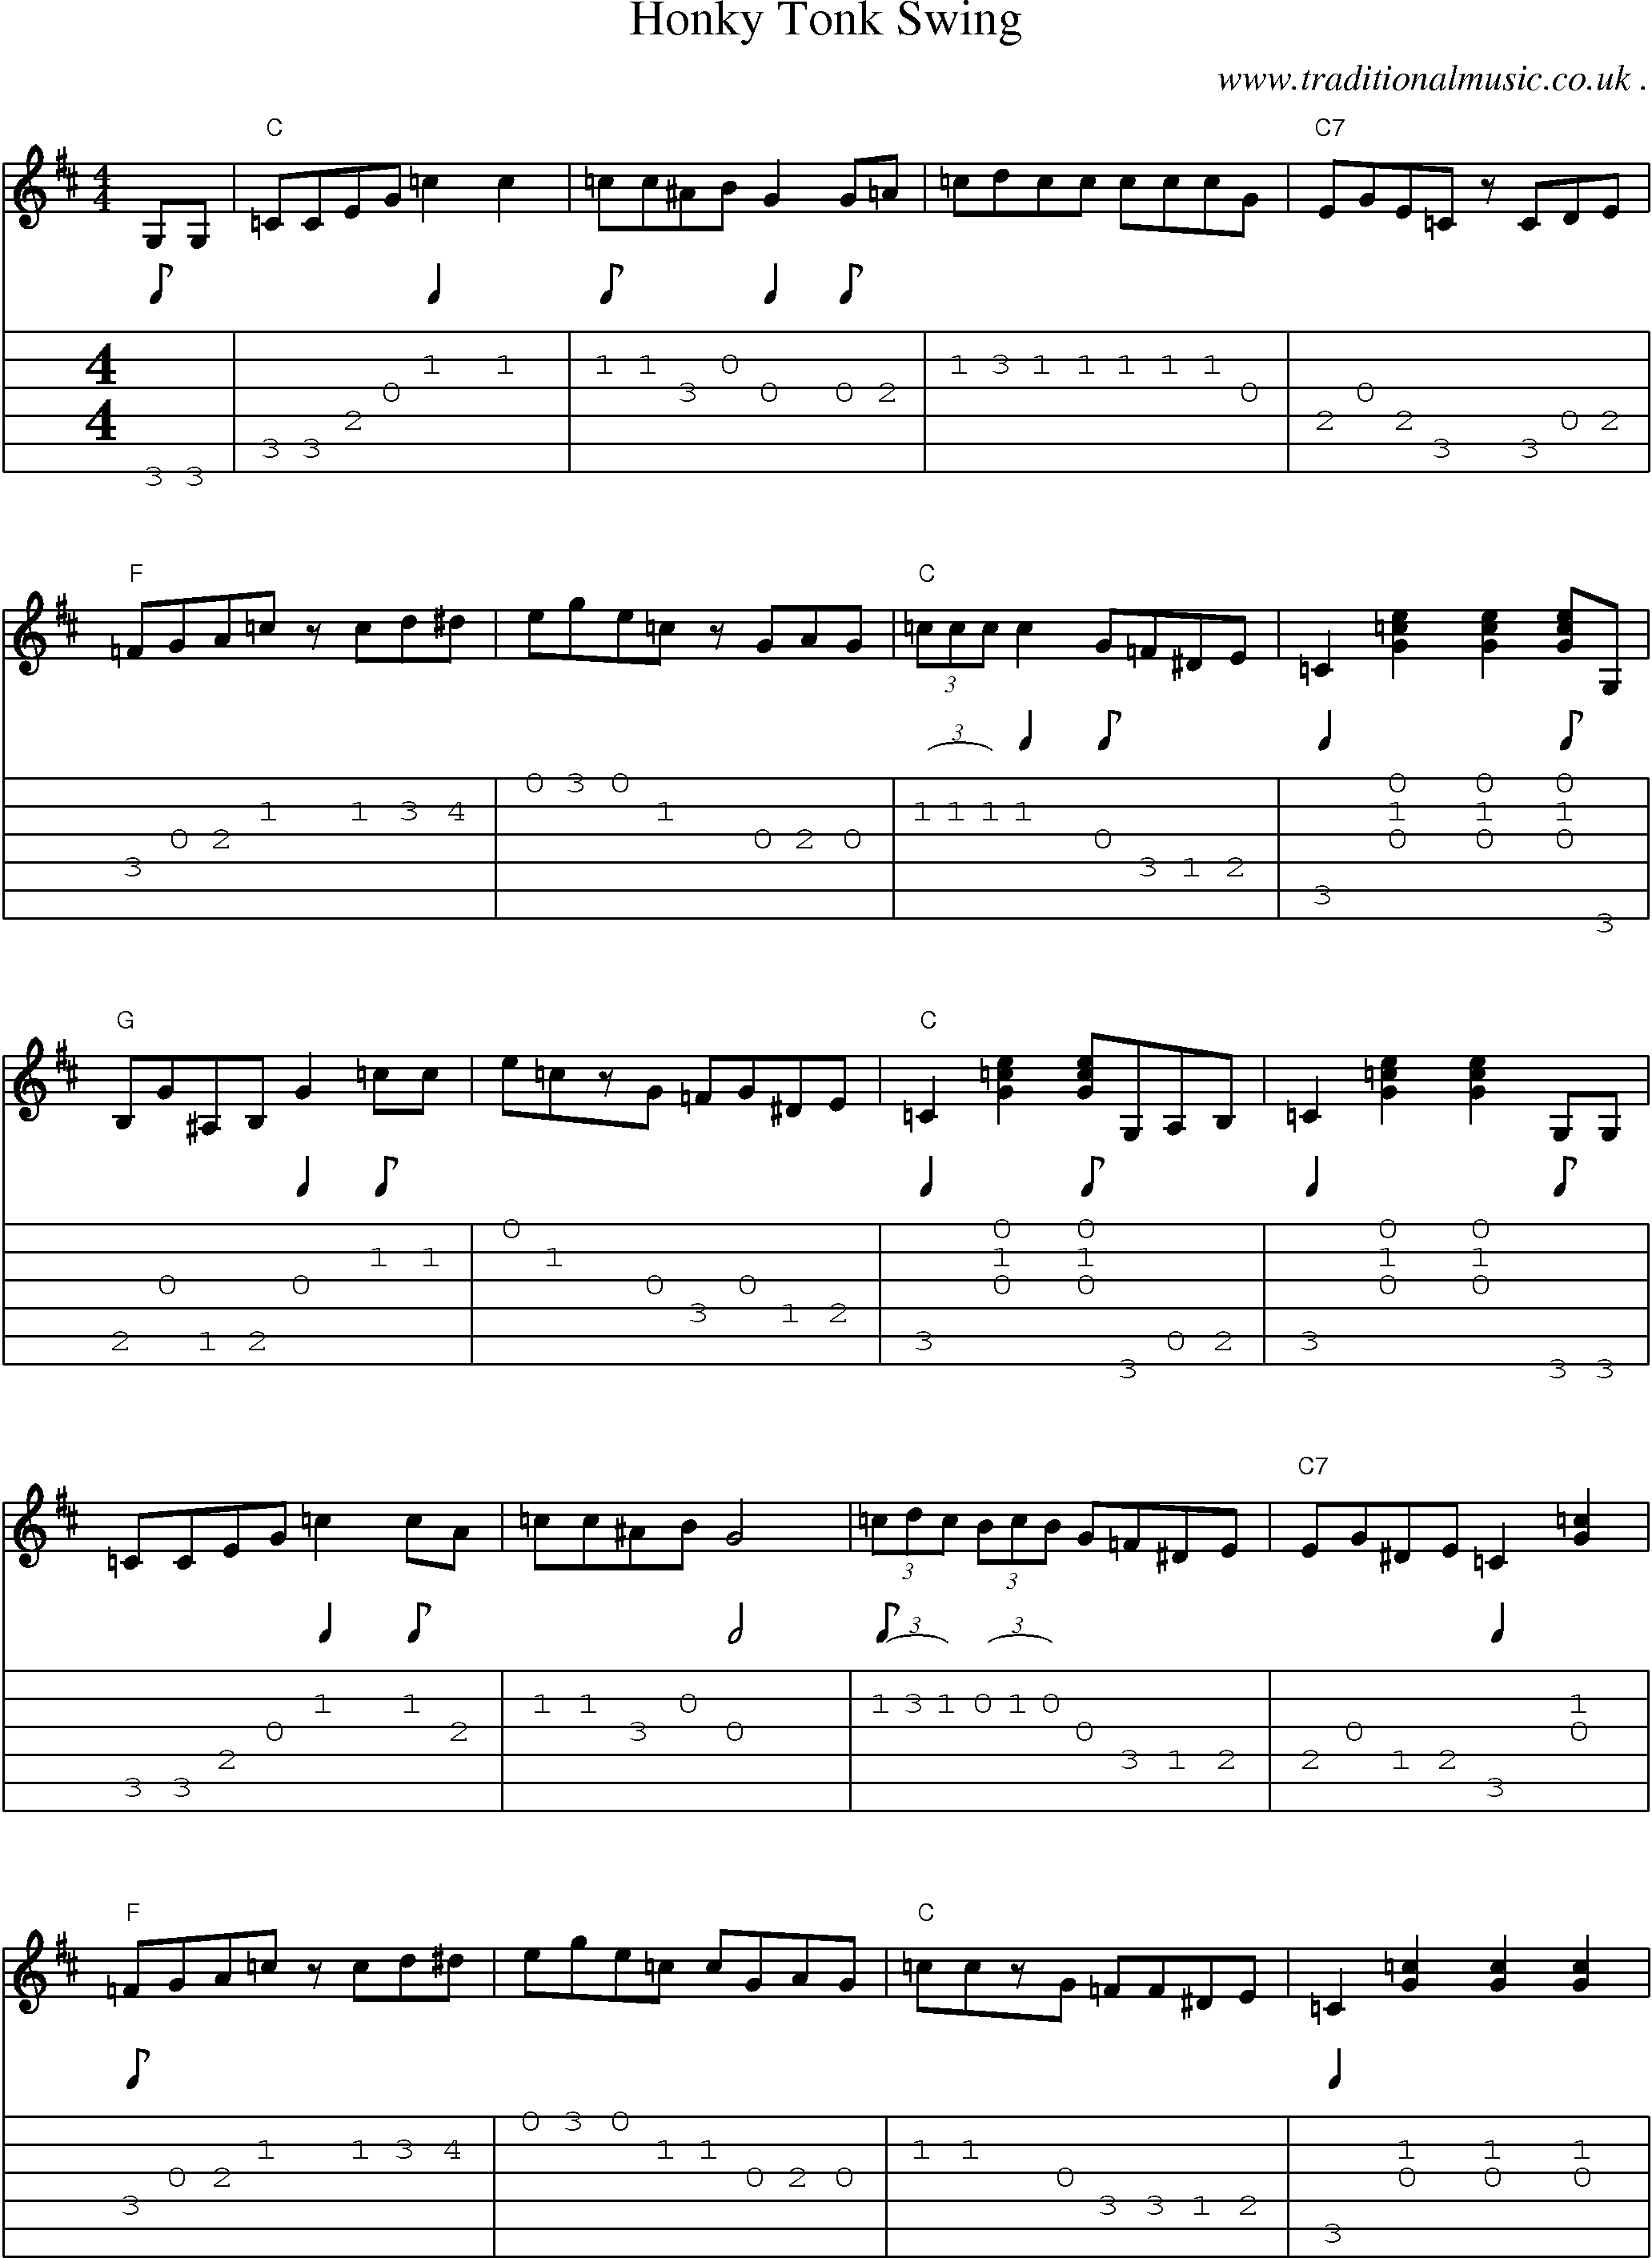 Music Score and Guitar Tabs for Honky Tonk Swing